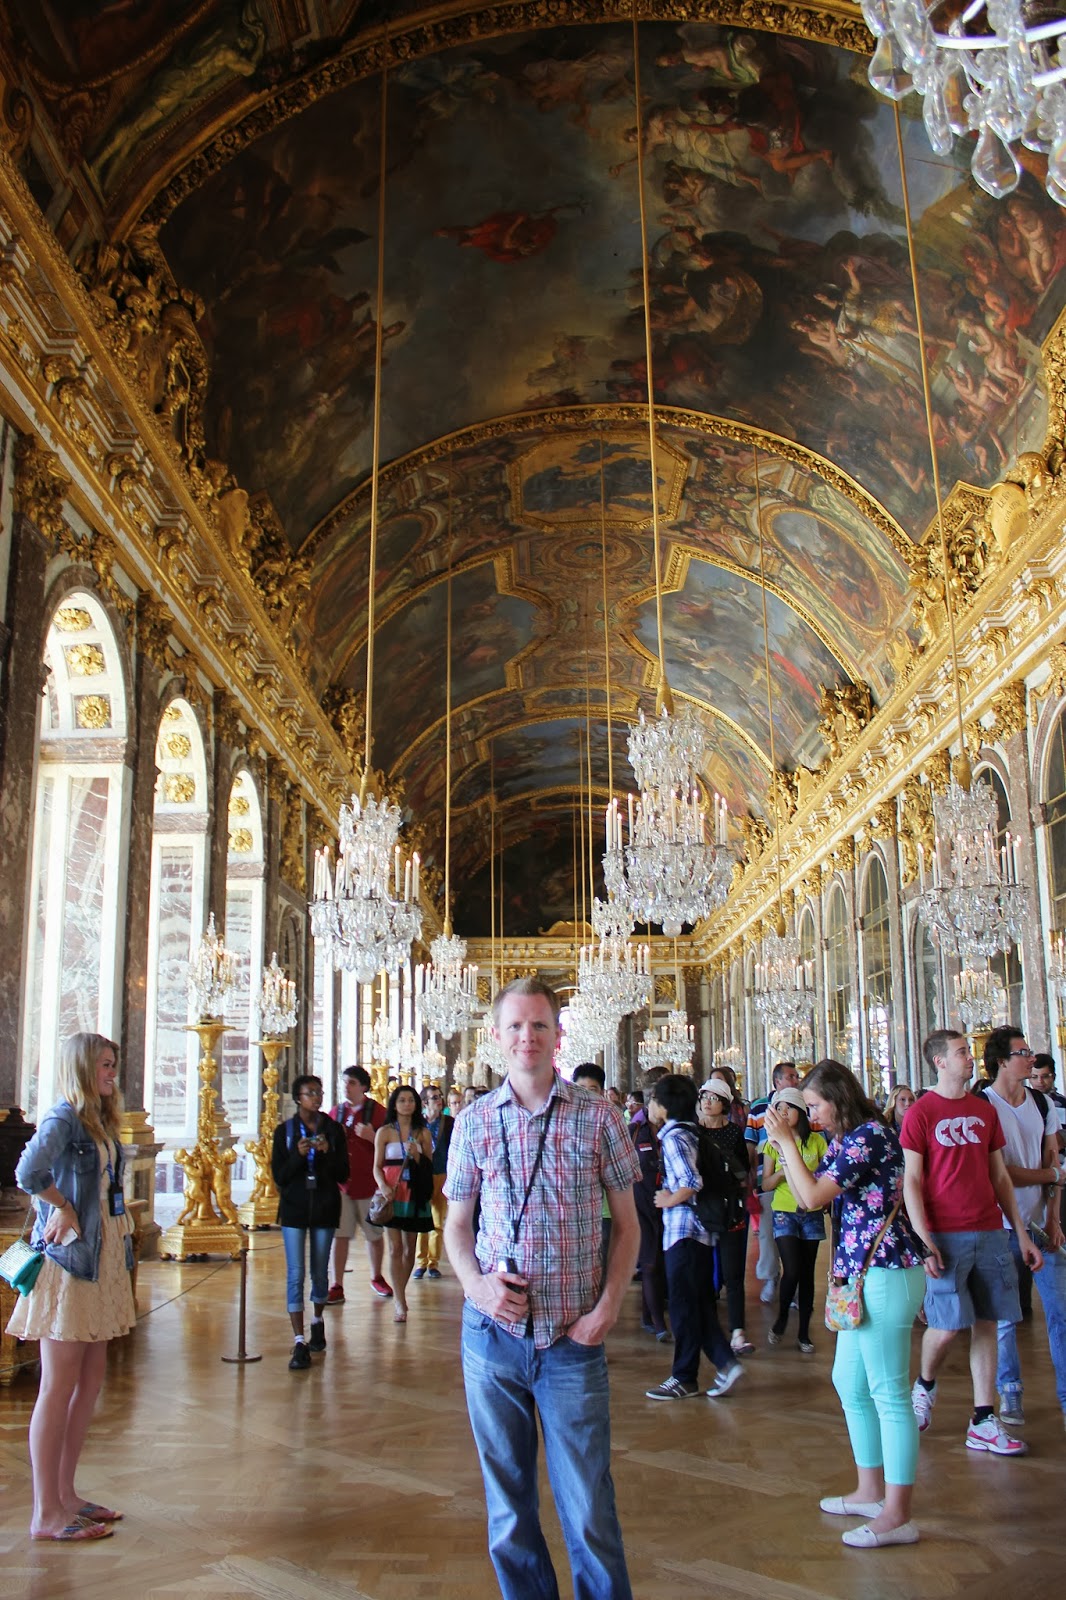 Room of mirrors in Versailles Palace in France. 